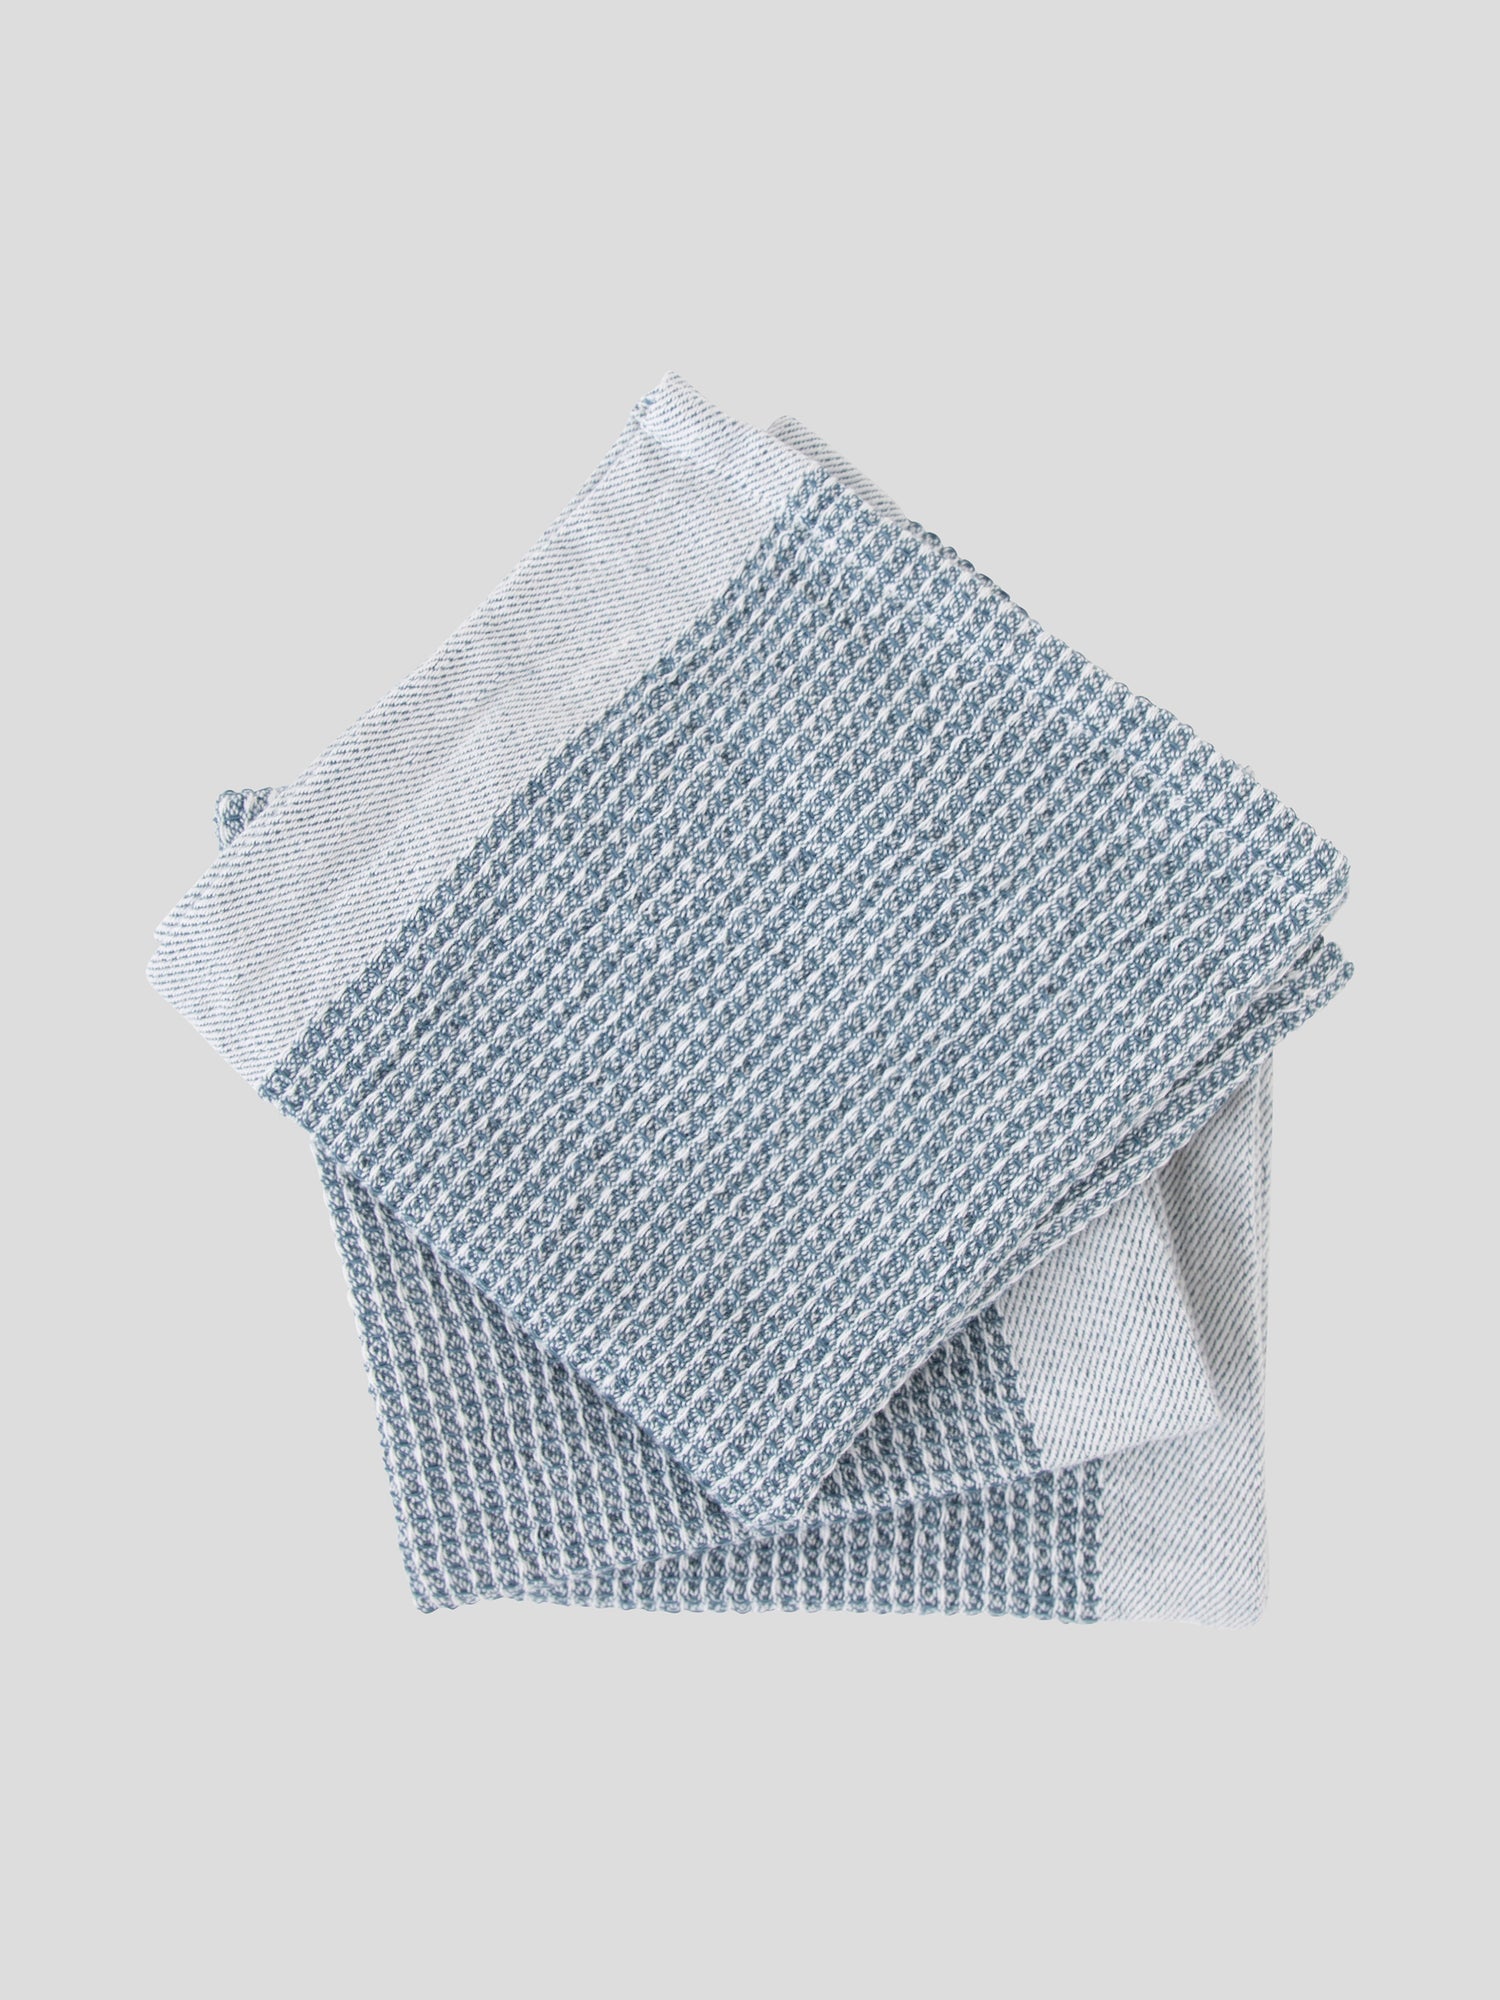 https://www.wallacecotton.com/content/products/organic-cotton-waffle-washcloth-set-of-3-denim-1-7646.jpg?width=1500